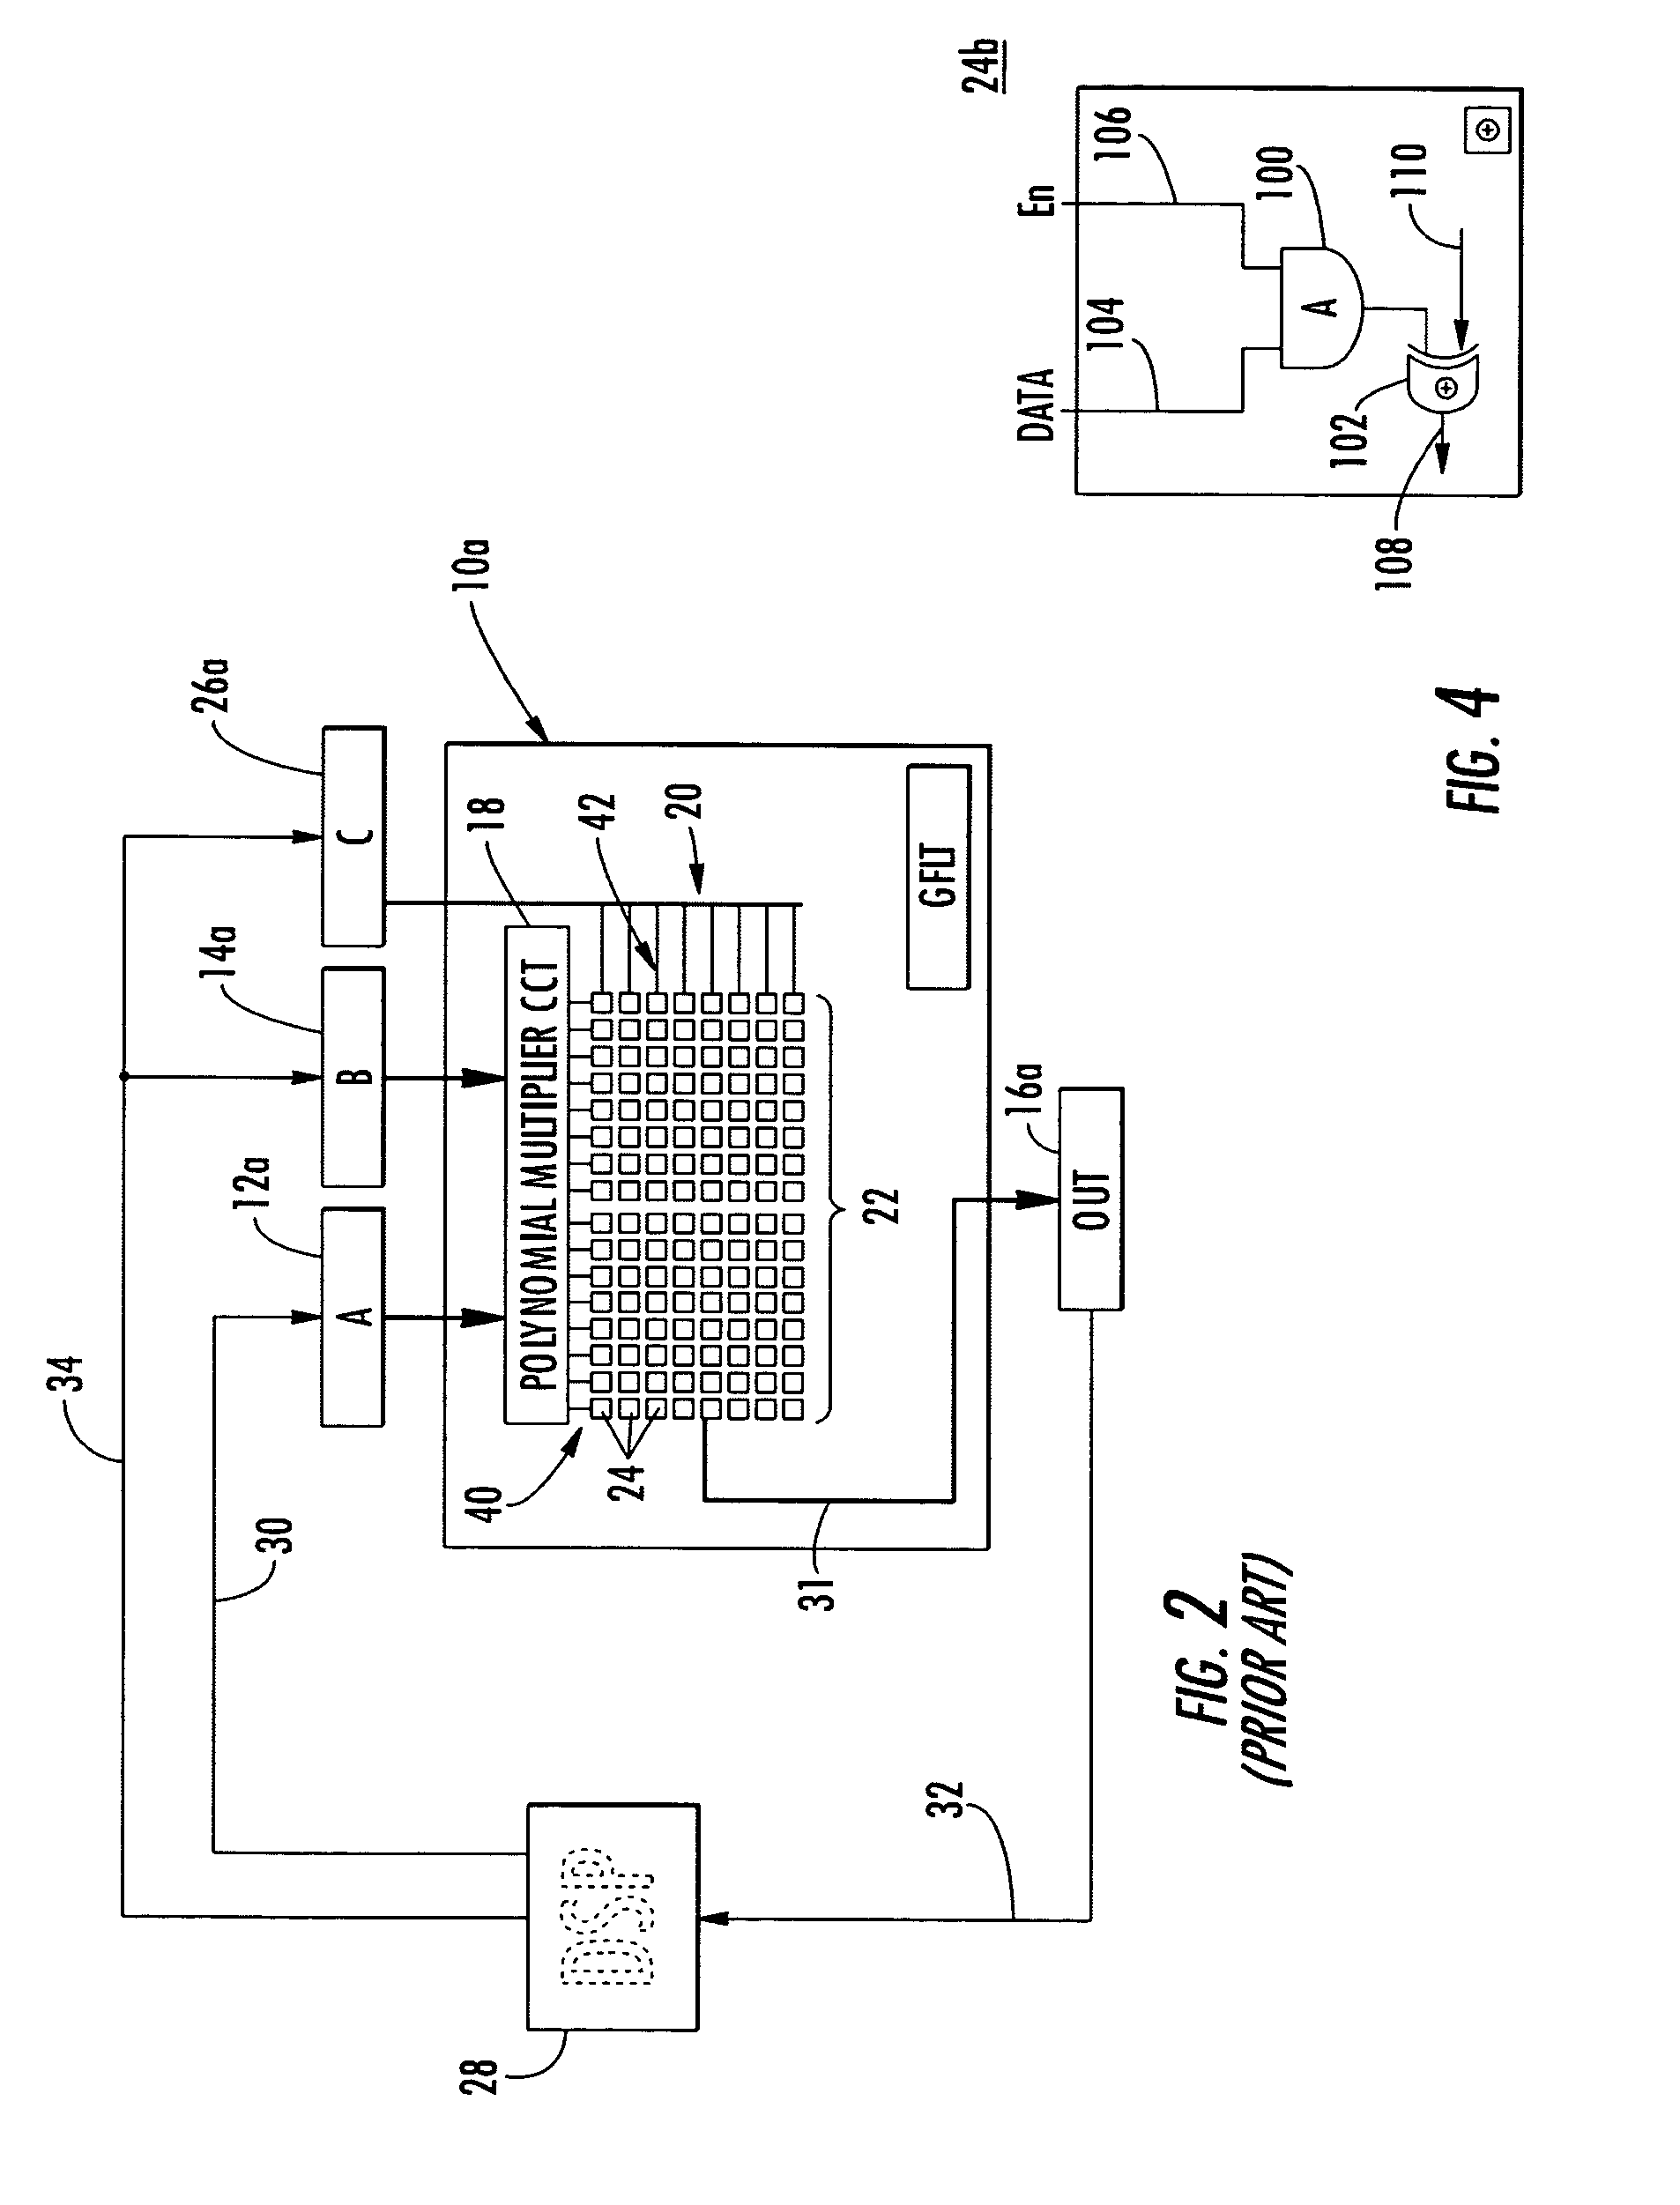 Compact Galois field multiplier engine